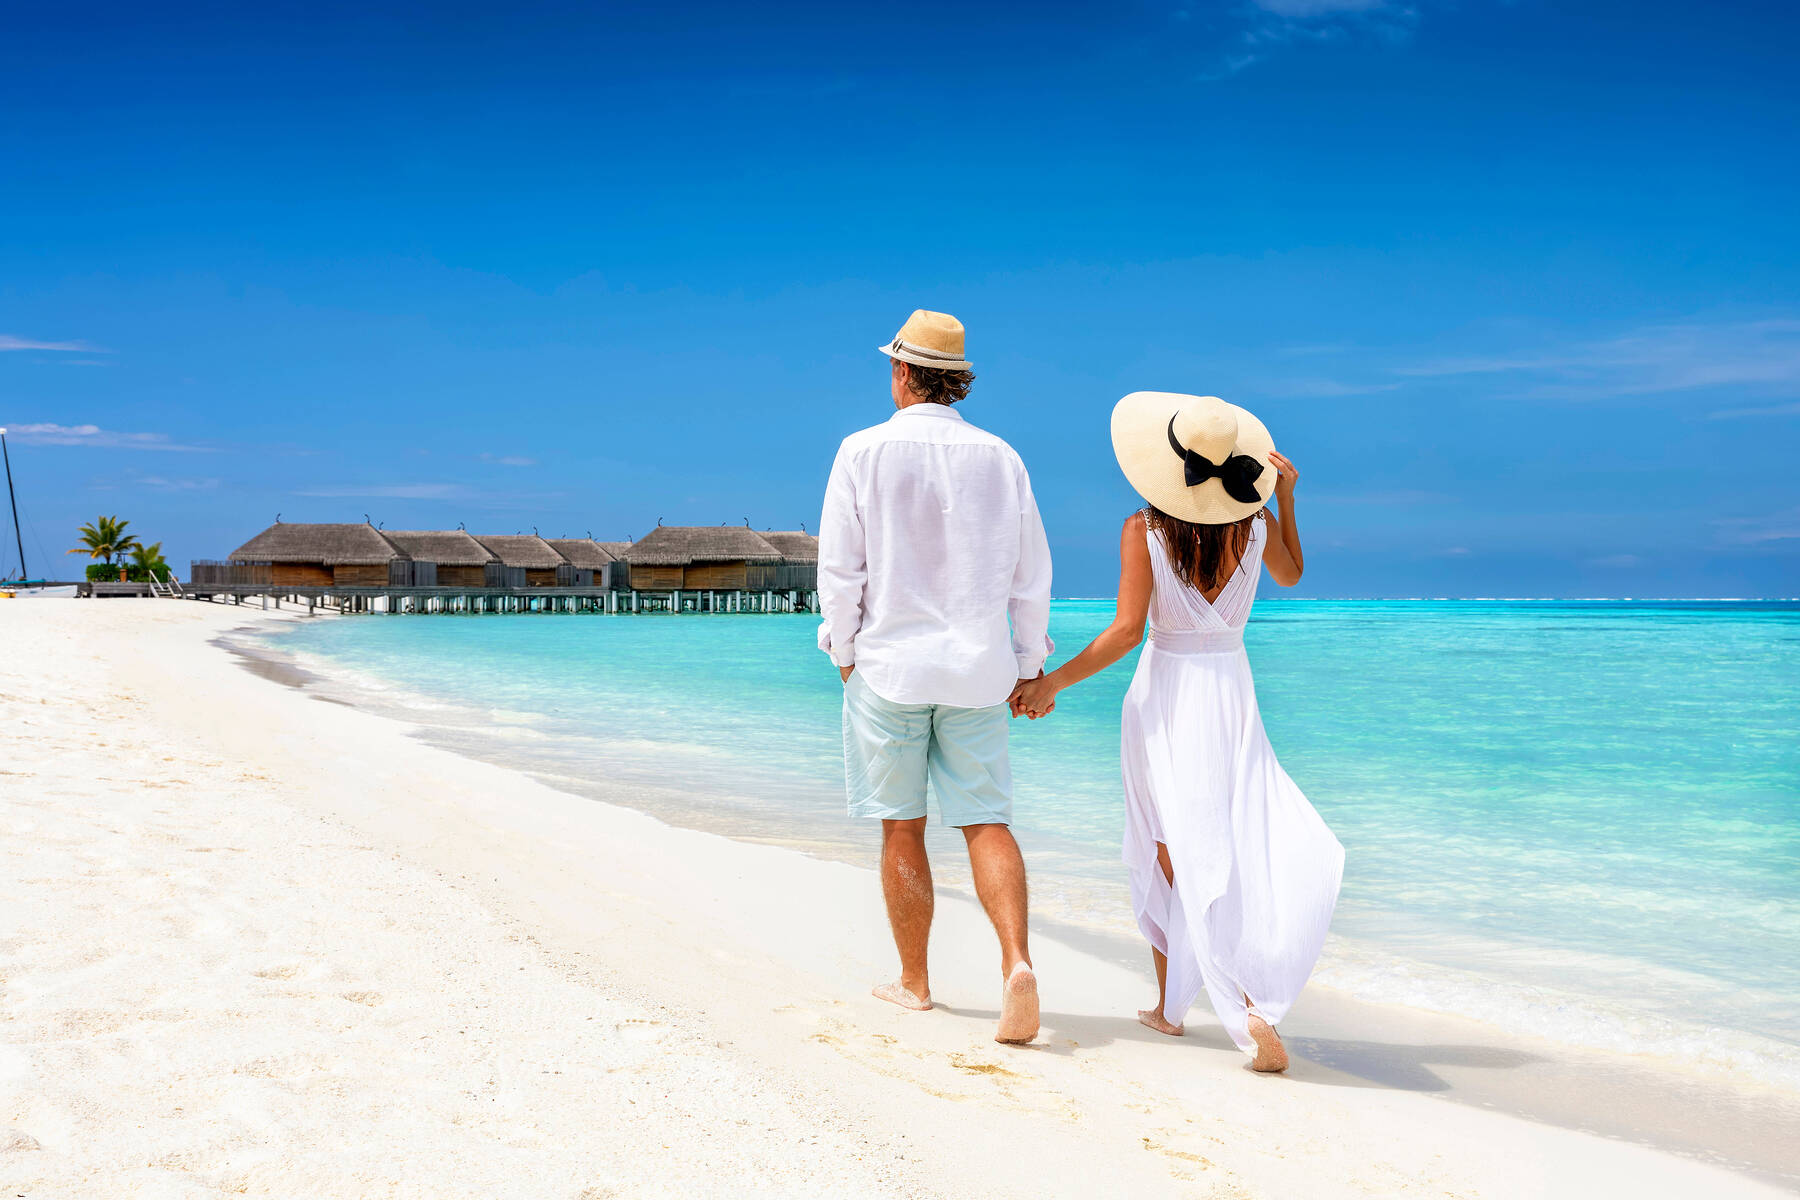 How to spend a romantic holiday in the Maldives